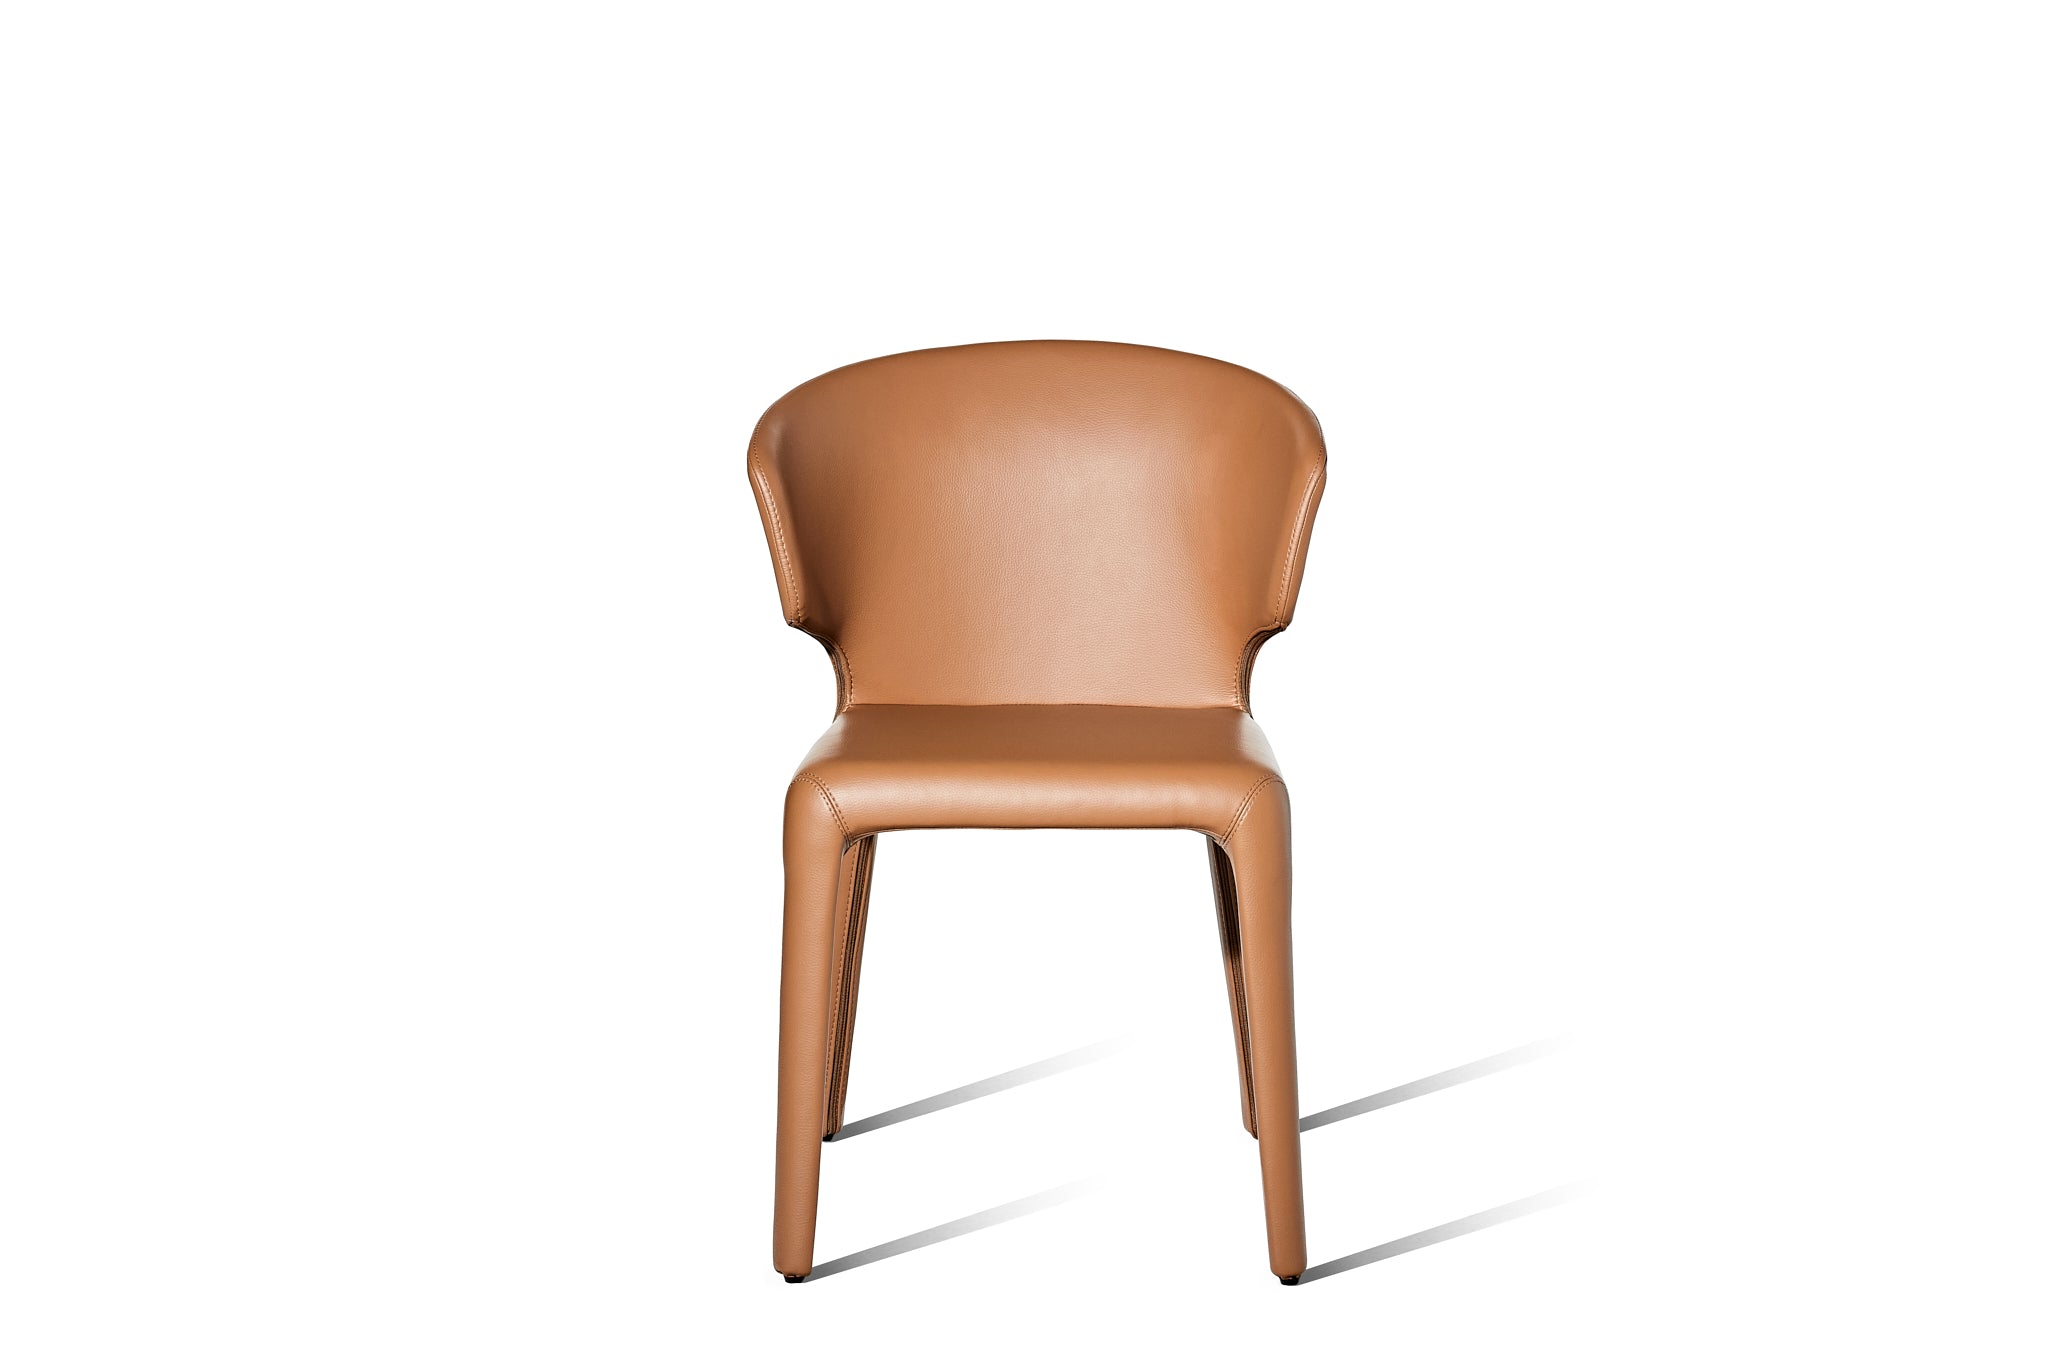 Husk Dining Chair, Chestnut Faux Leather - 60% OFF - Zuster Furniture